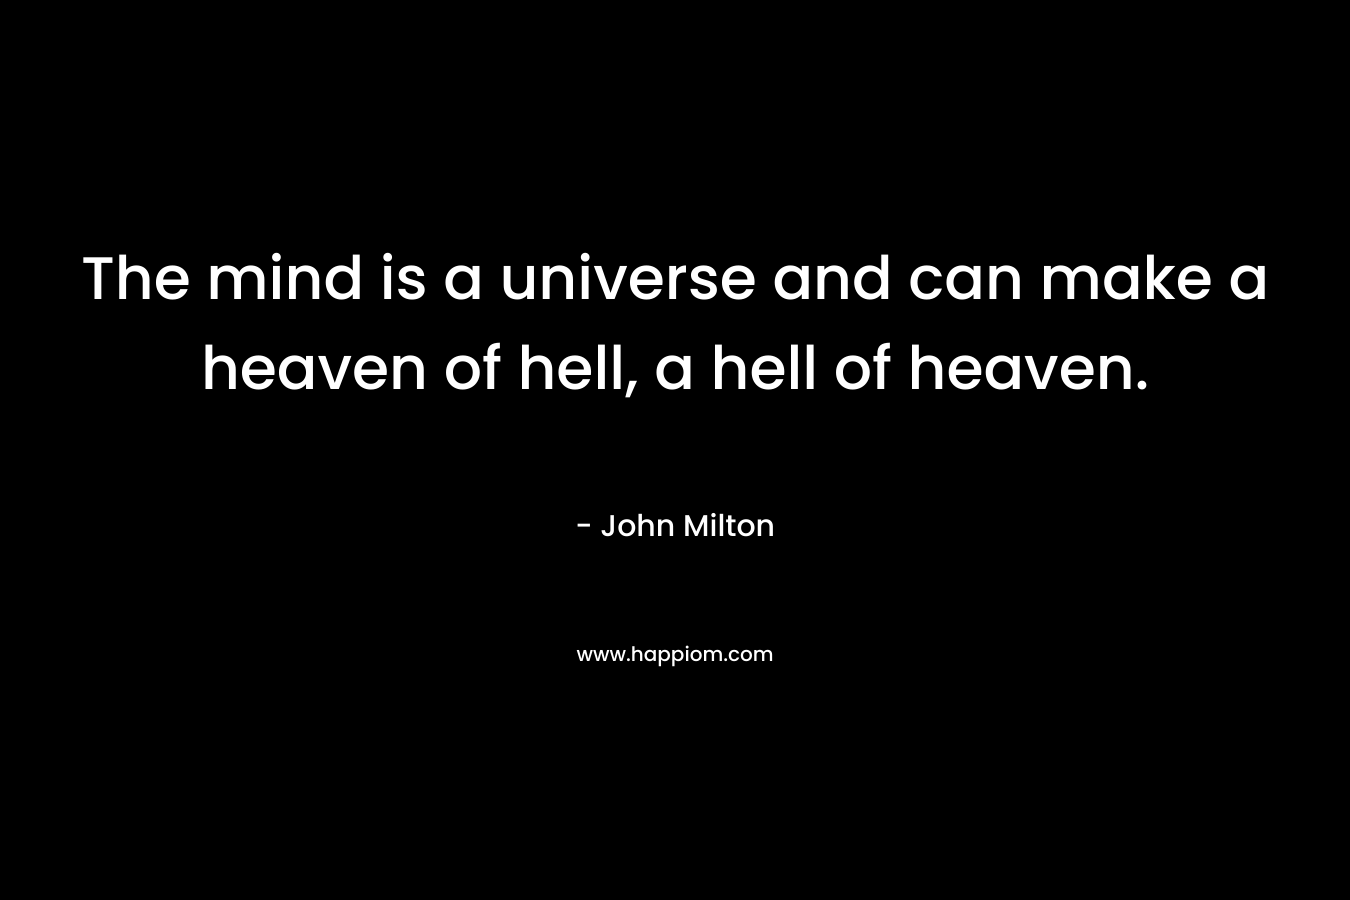 The mind is a universe and can make a heaven of hell, a hell of heaven.